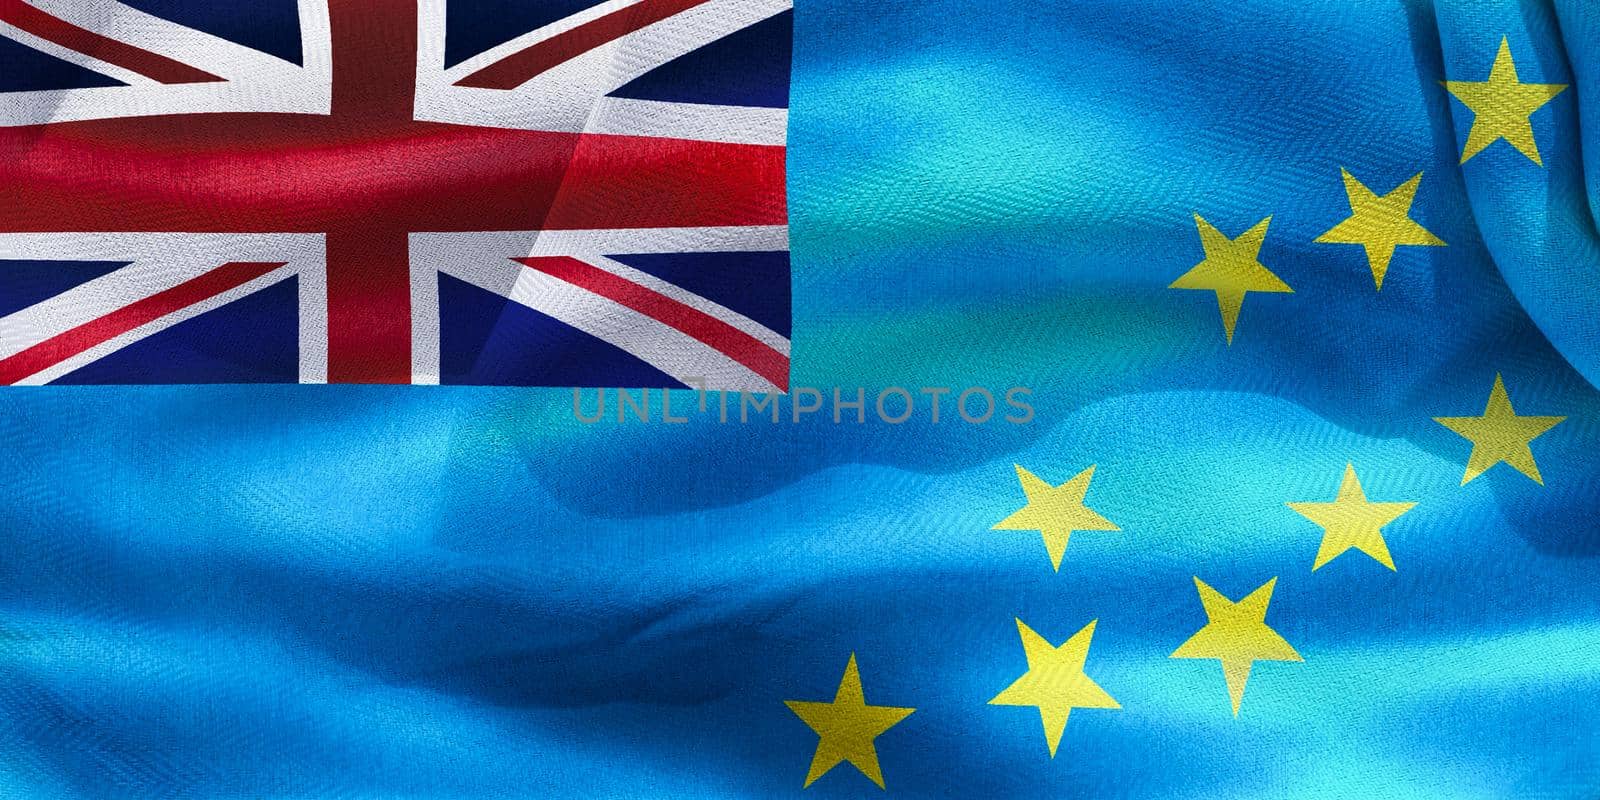 3D-Illustration of a Tuvalu flag - realistic waving fabric flag by MP_foto71